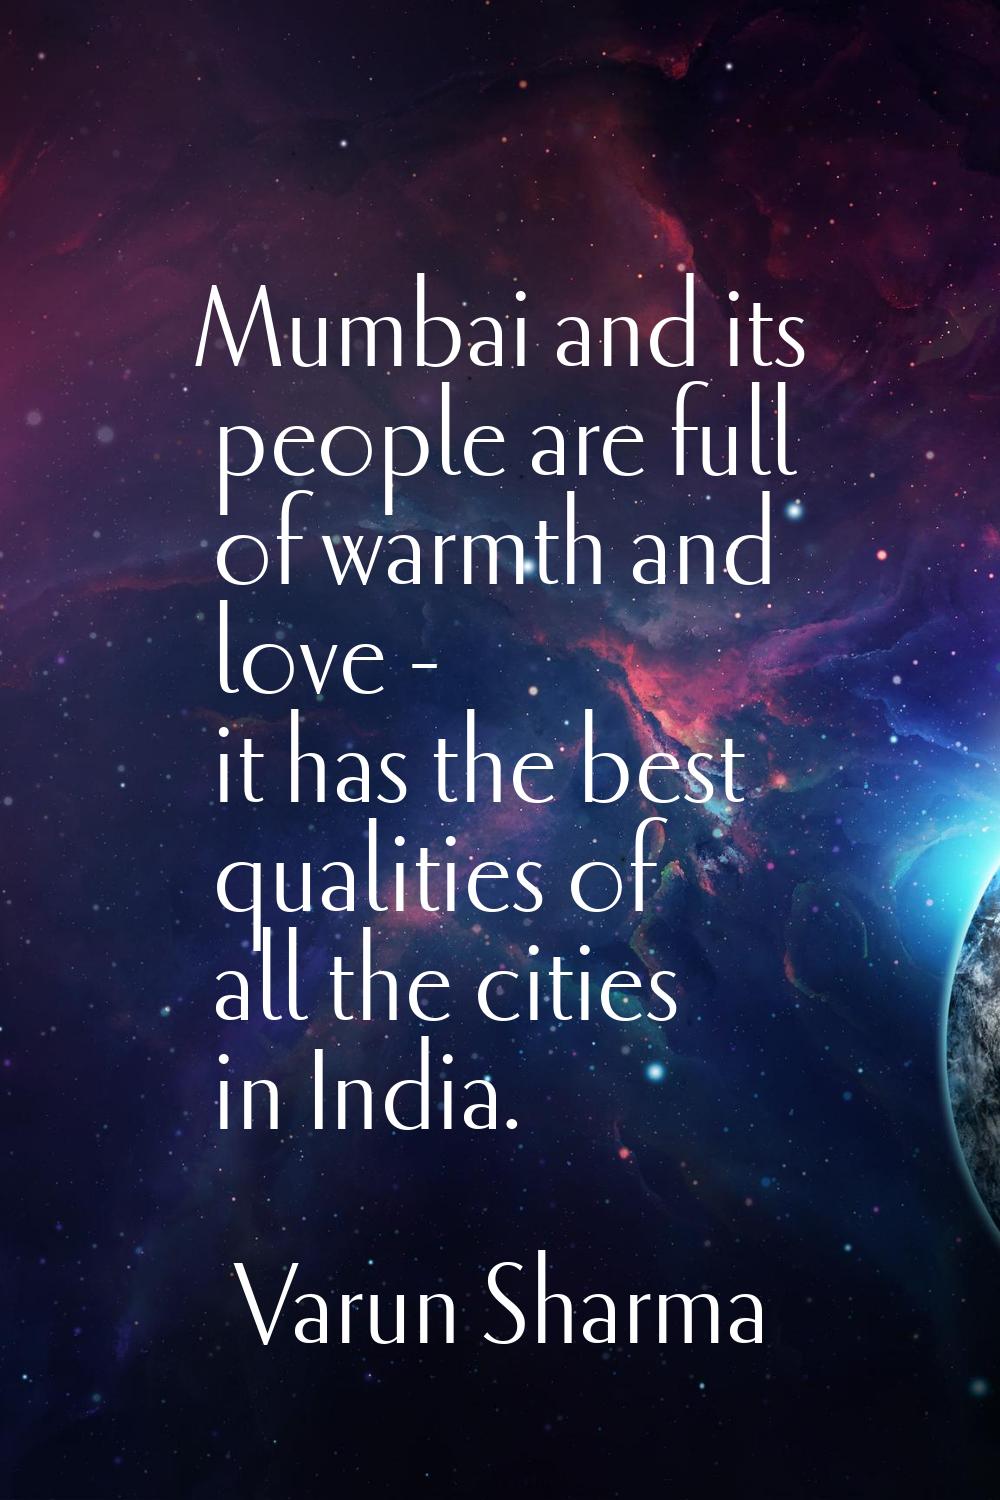 Mumbai and its people are full of warmth and love - it has the best qualities of all the cities in 